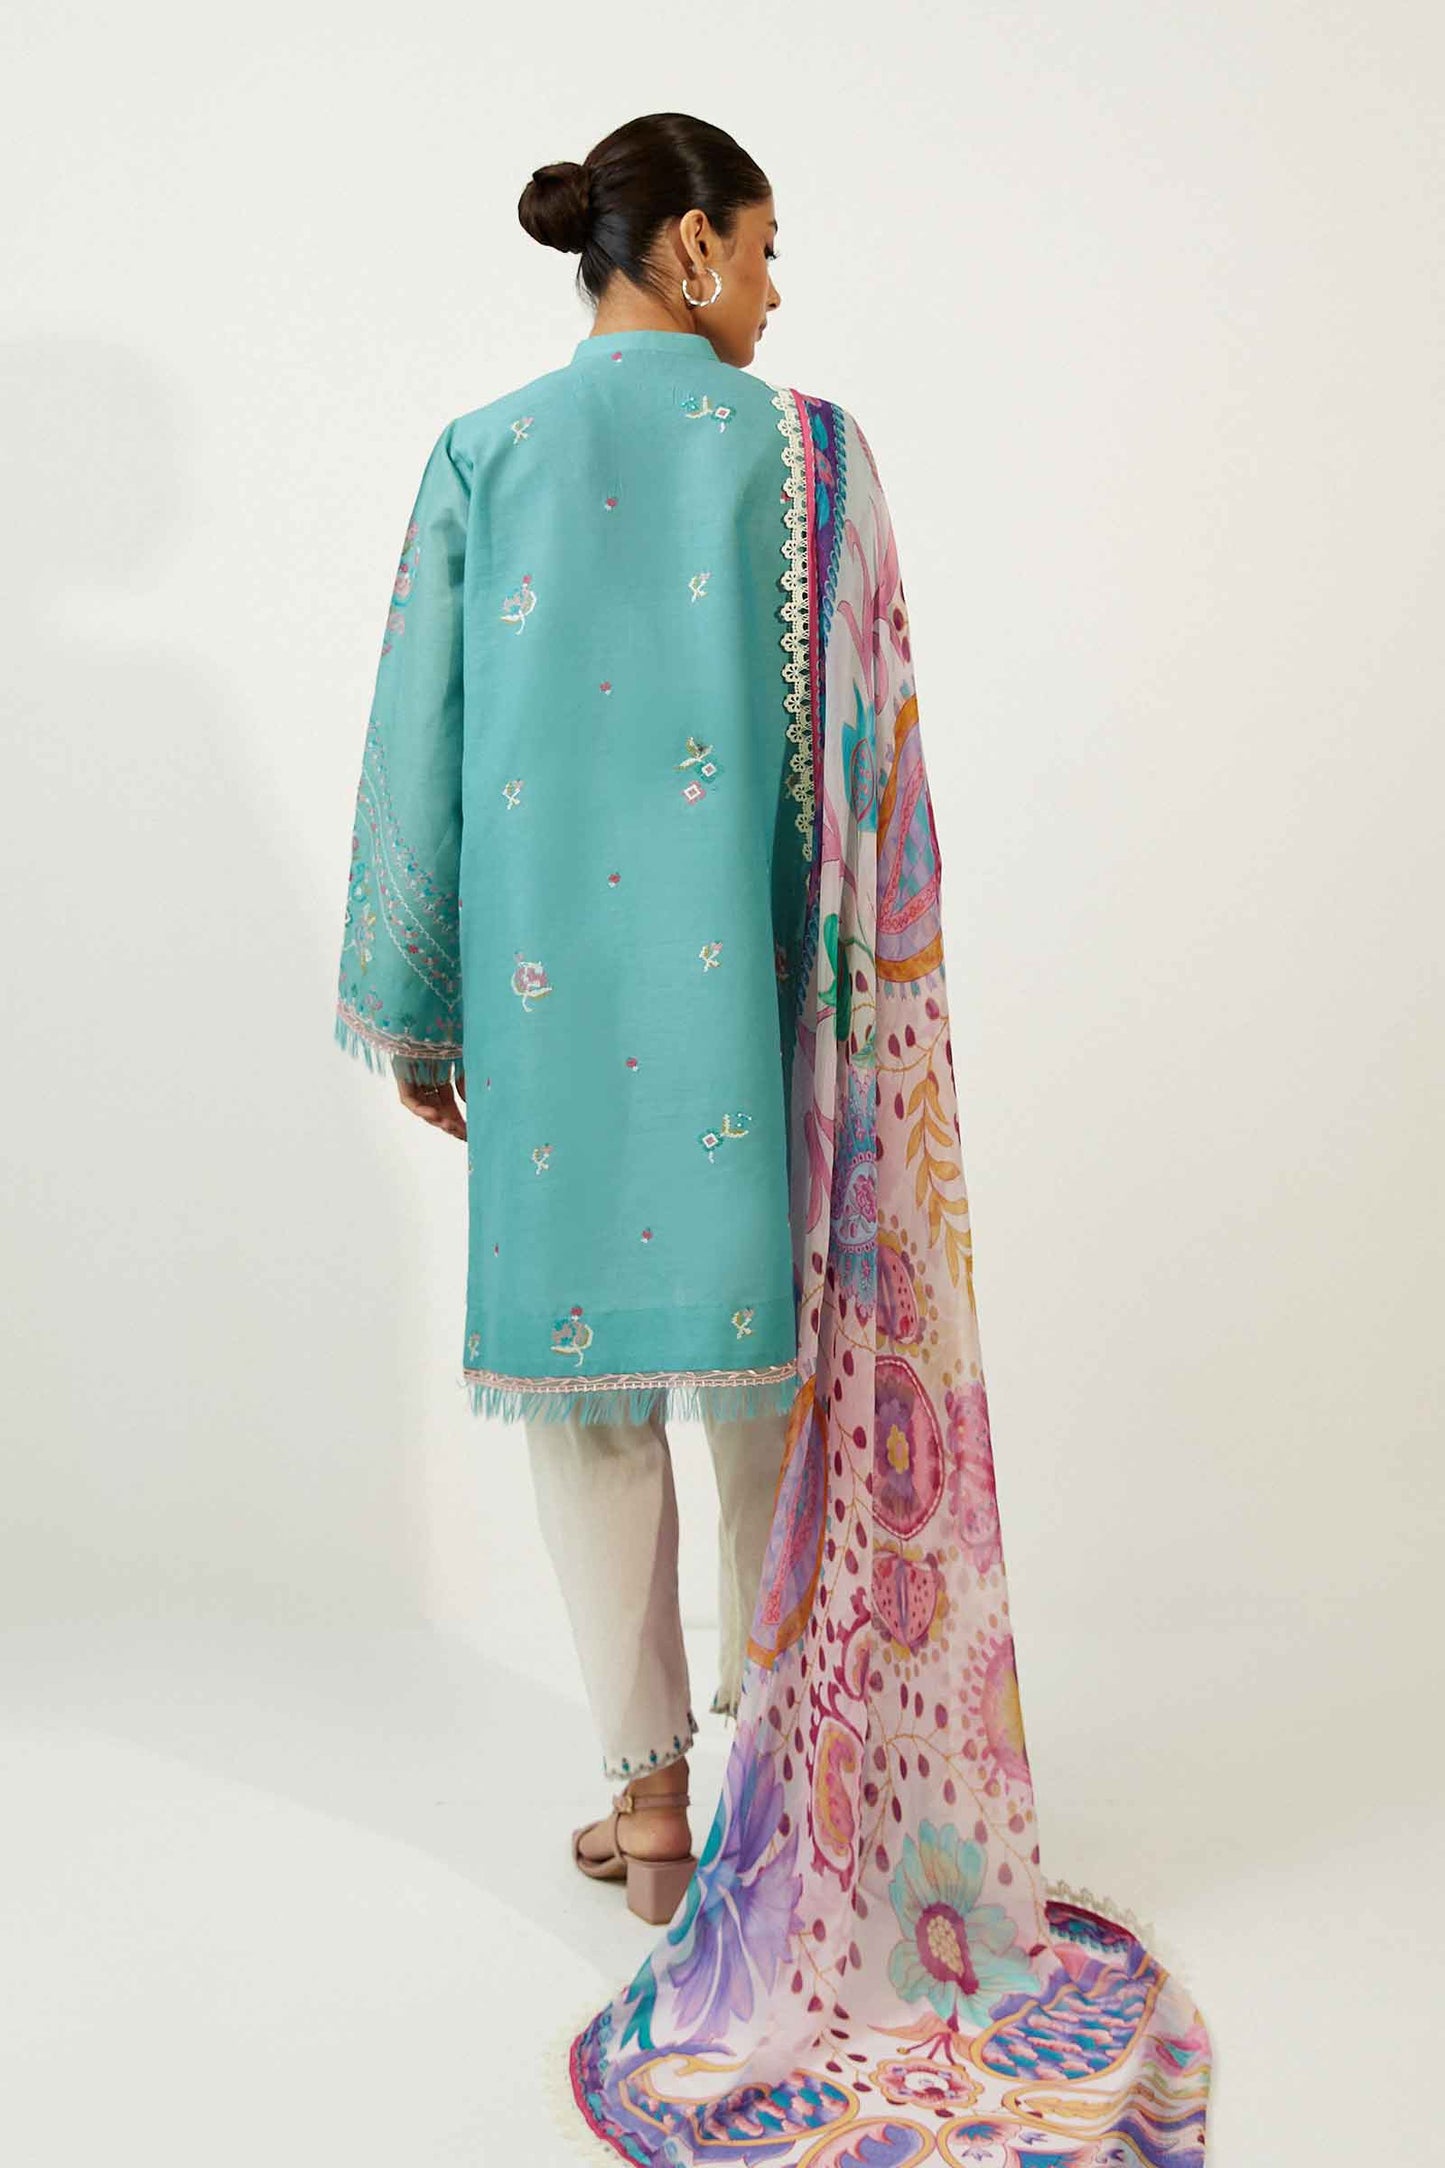 Coco by Zara Shahjahan Embroidered Lawn Suits Unstitched 3 Piece ZCE23-4B